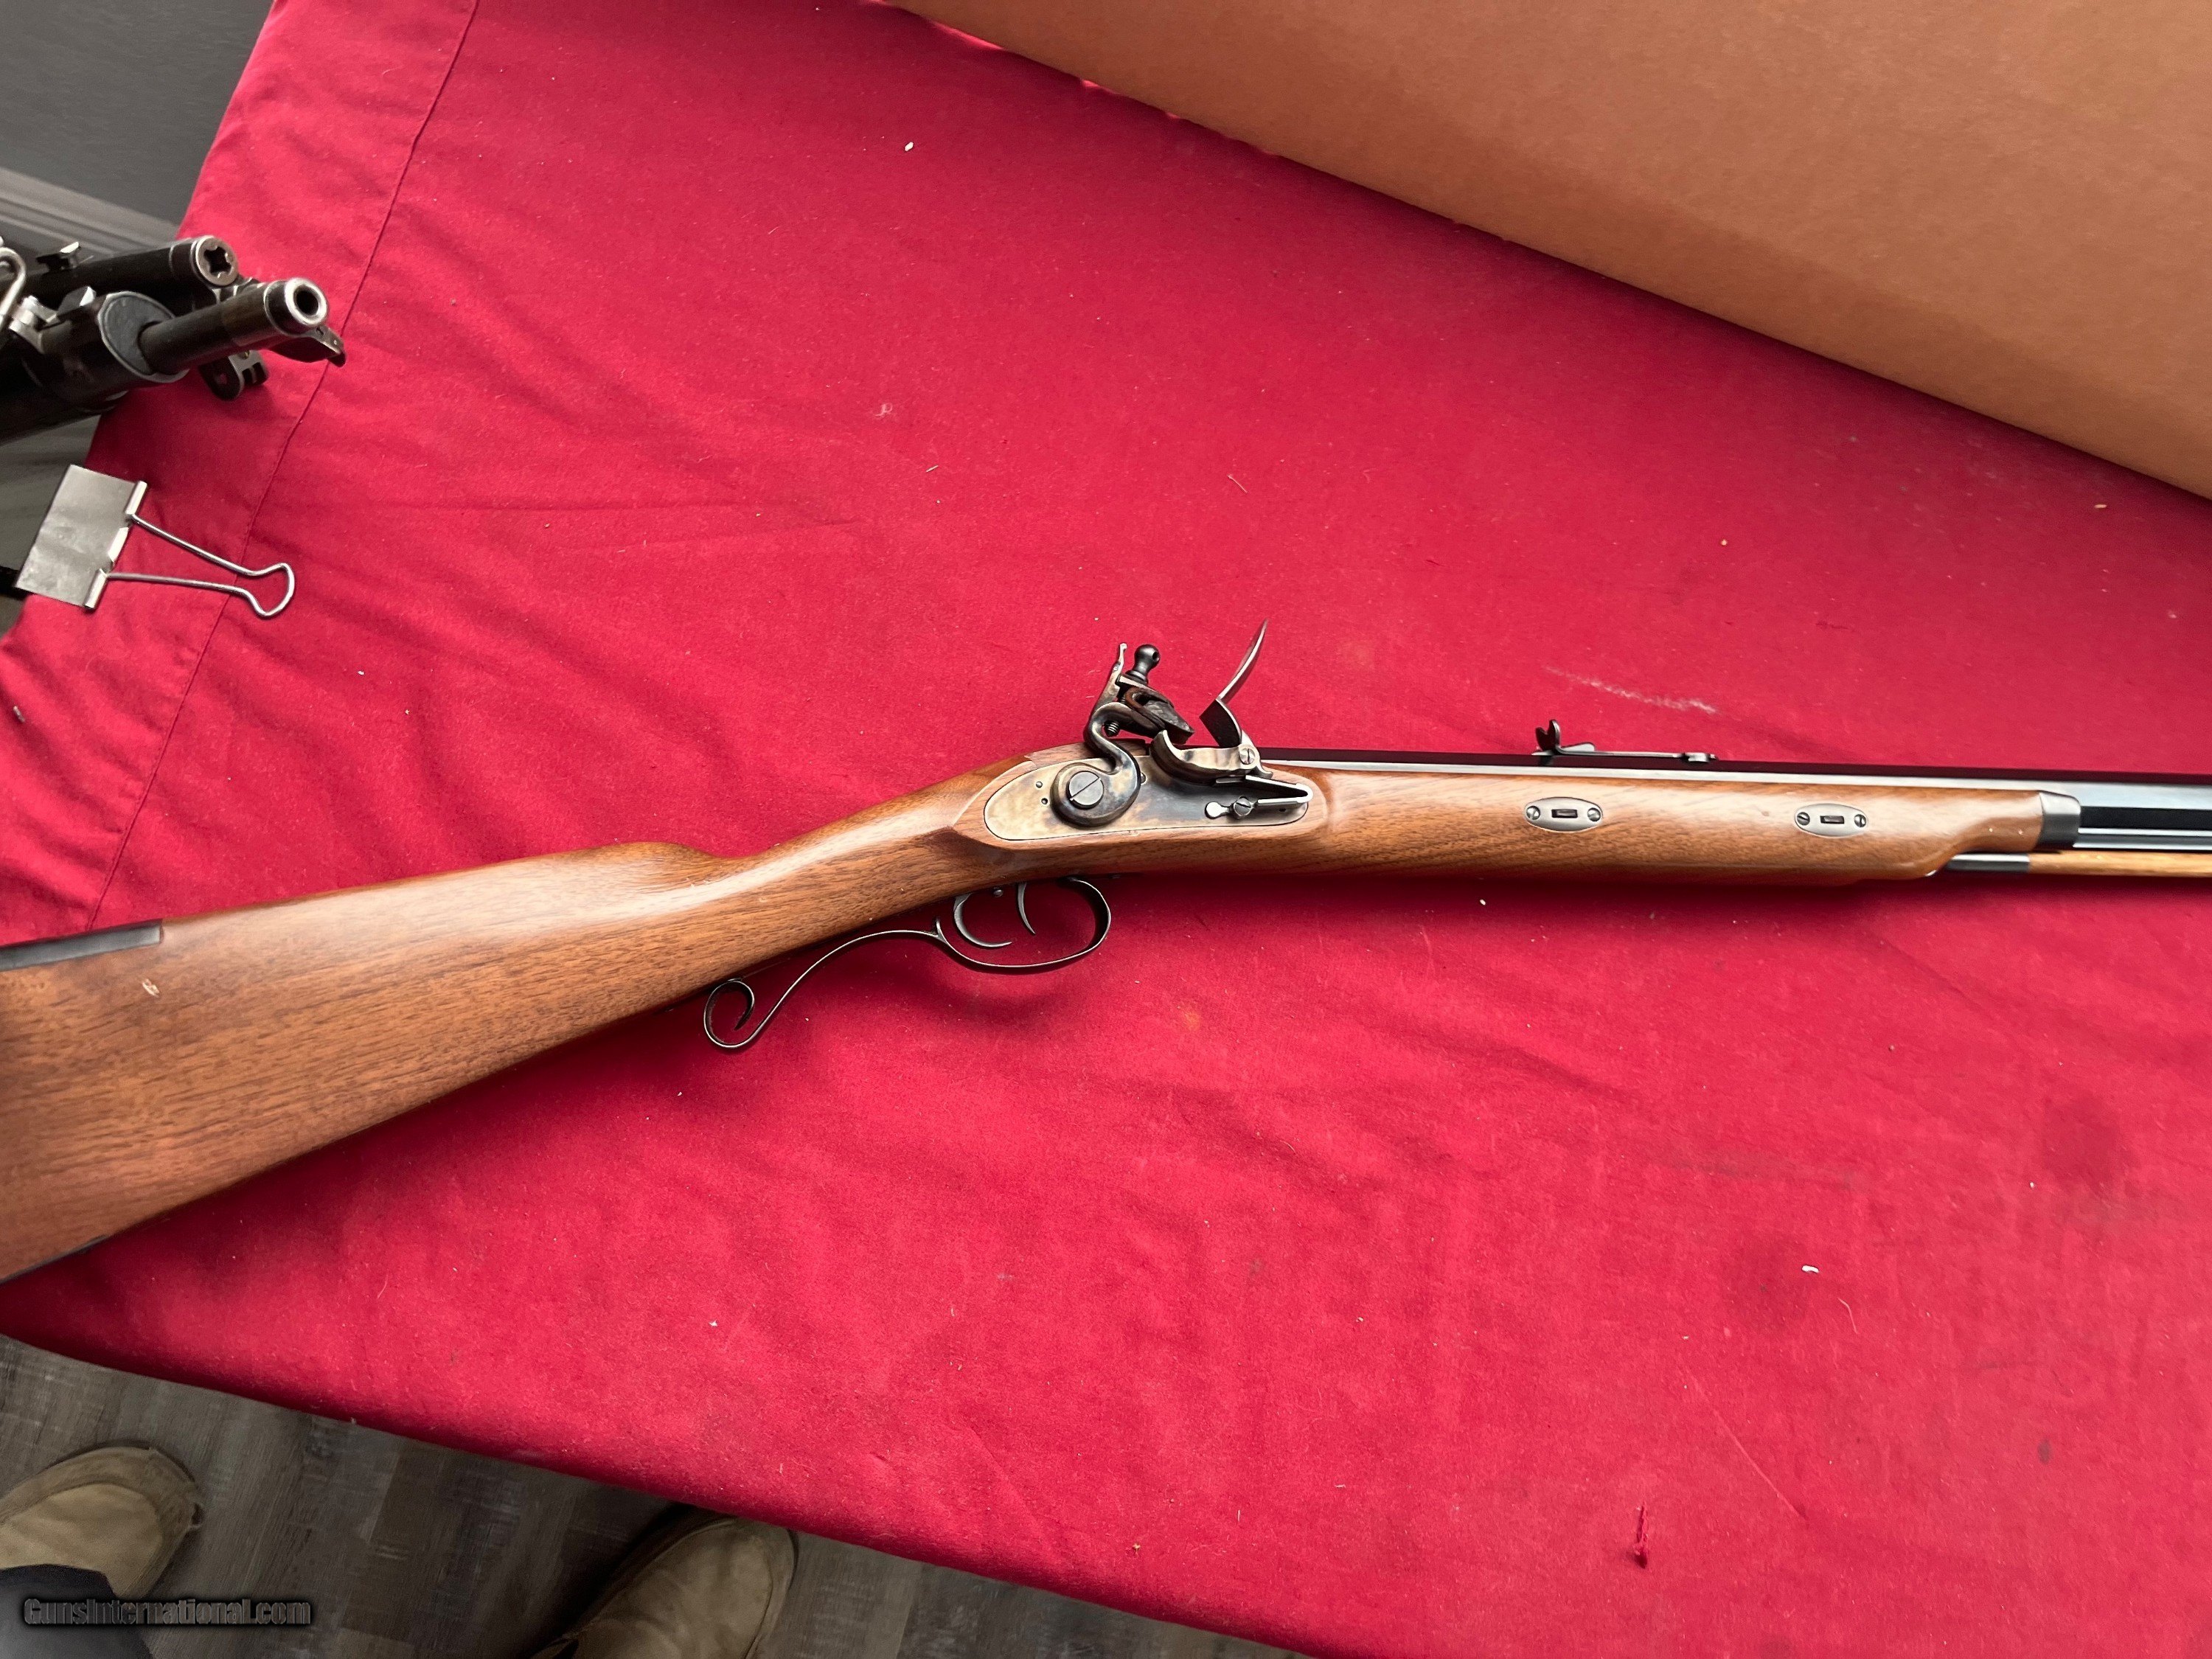 What Accessories Do I Need for My Muzzleloader?, Flintlock, Pt 3